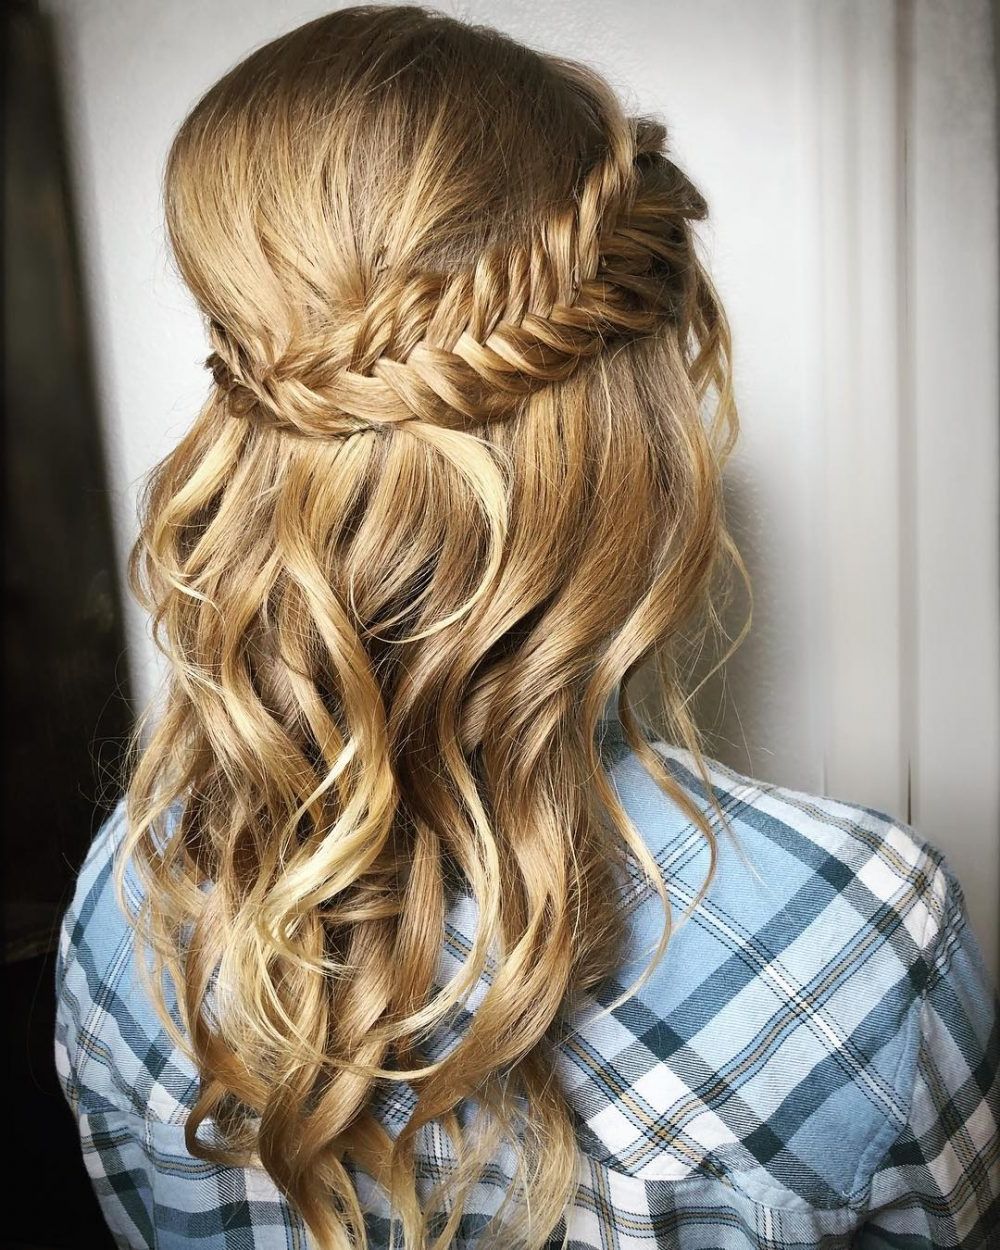 27 Prettiest Half Up Half Down Prom Hairstyles For 2019 With Best And Newest Half Prom Updos With Bangs And Braided Headband (View 2 of 20)